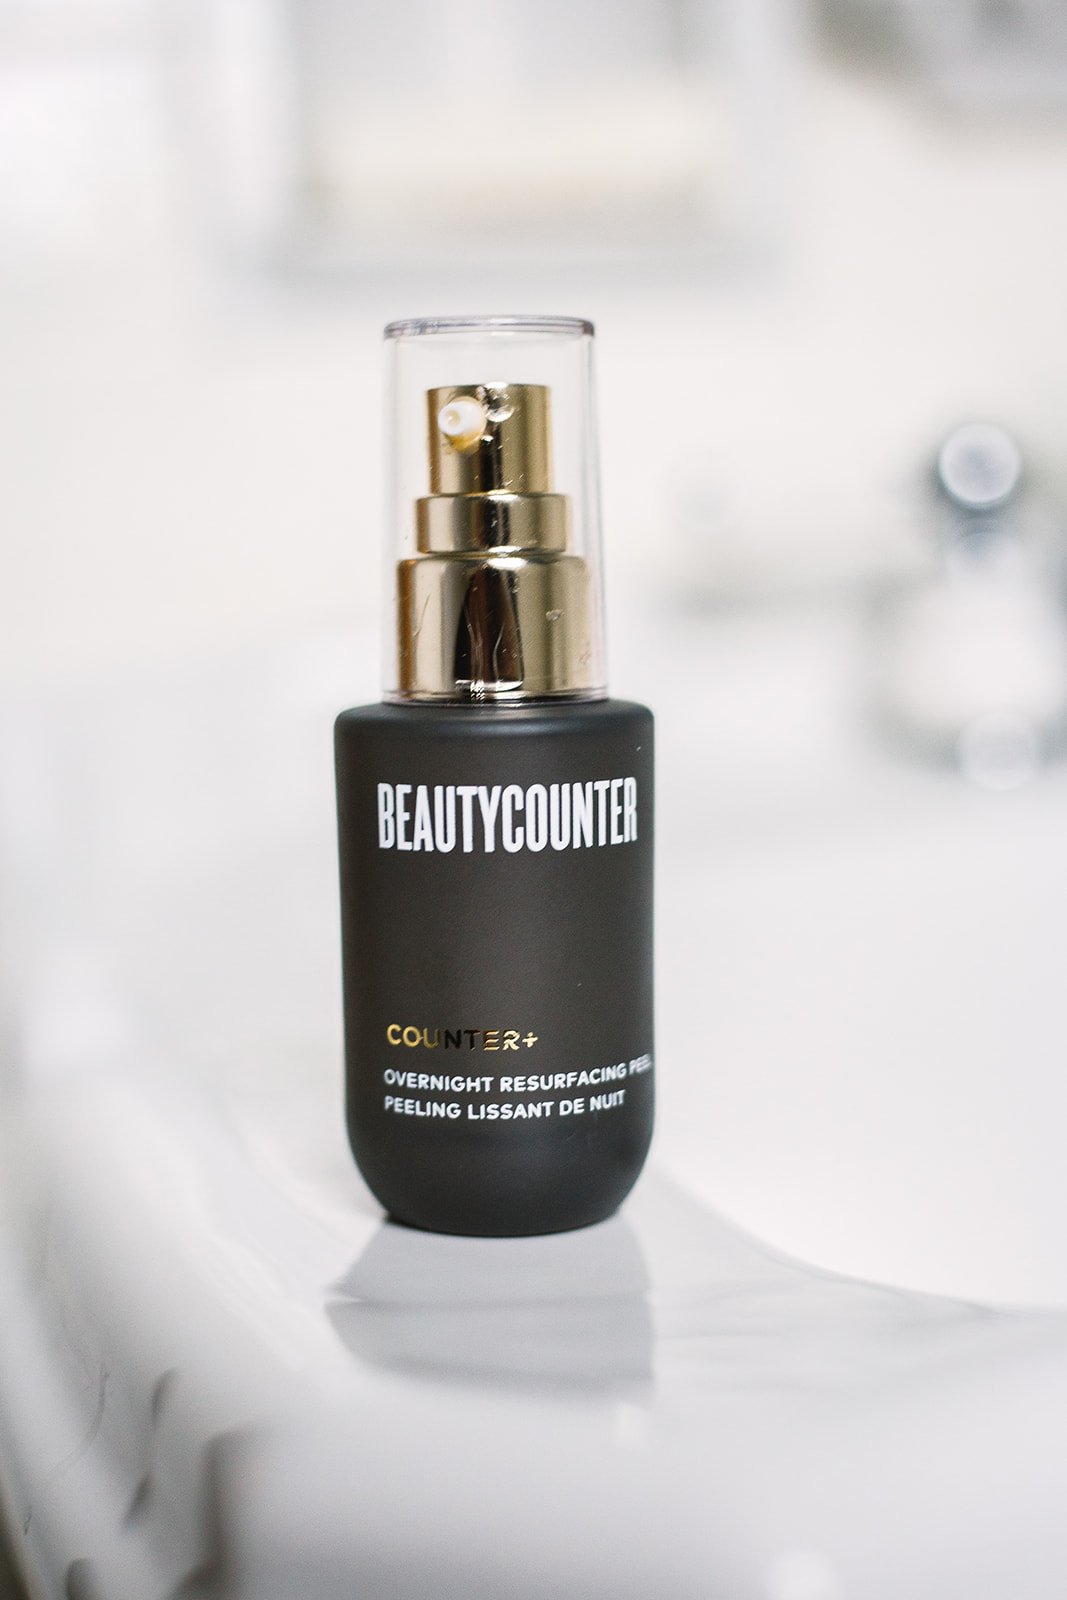 is Beautycounter safe for pregnancy?